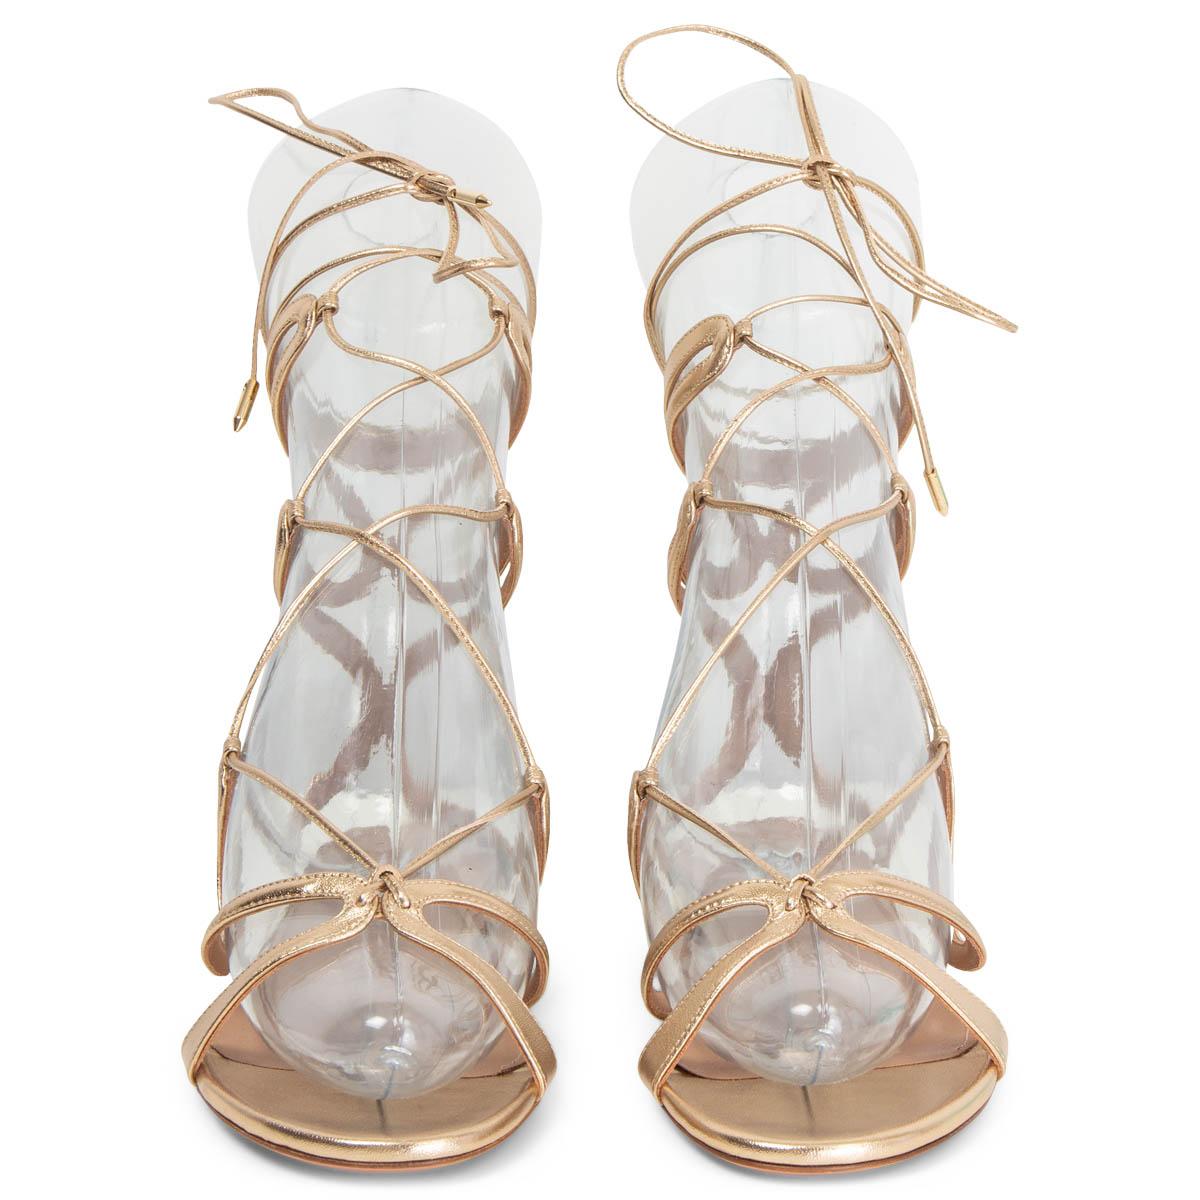 100% authentic Aquazzura Pompei lace-up sandals have a caged gladiator silhouette with slim, curved straps that cradle your feet and ankles made in the label's Italian atelier from supple gold leather. Adjust the lace-up ties to find your perfect